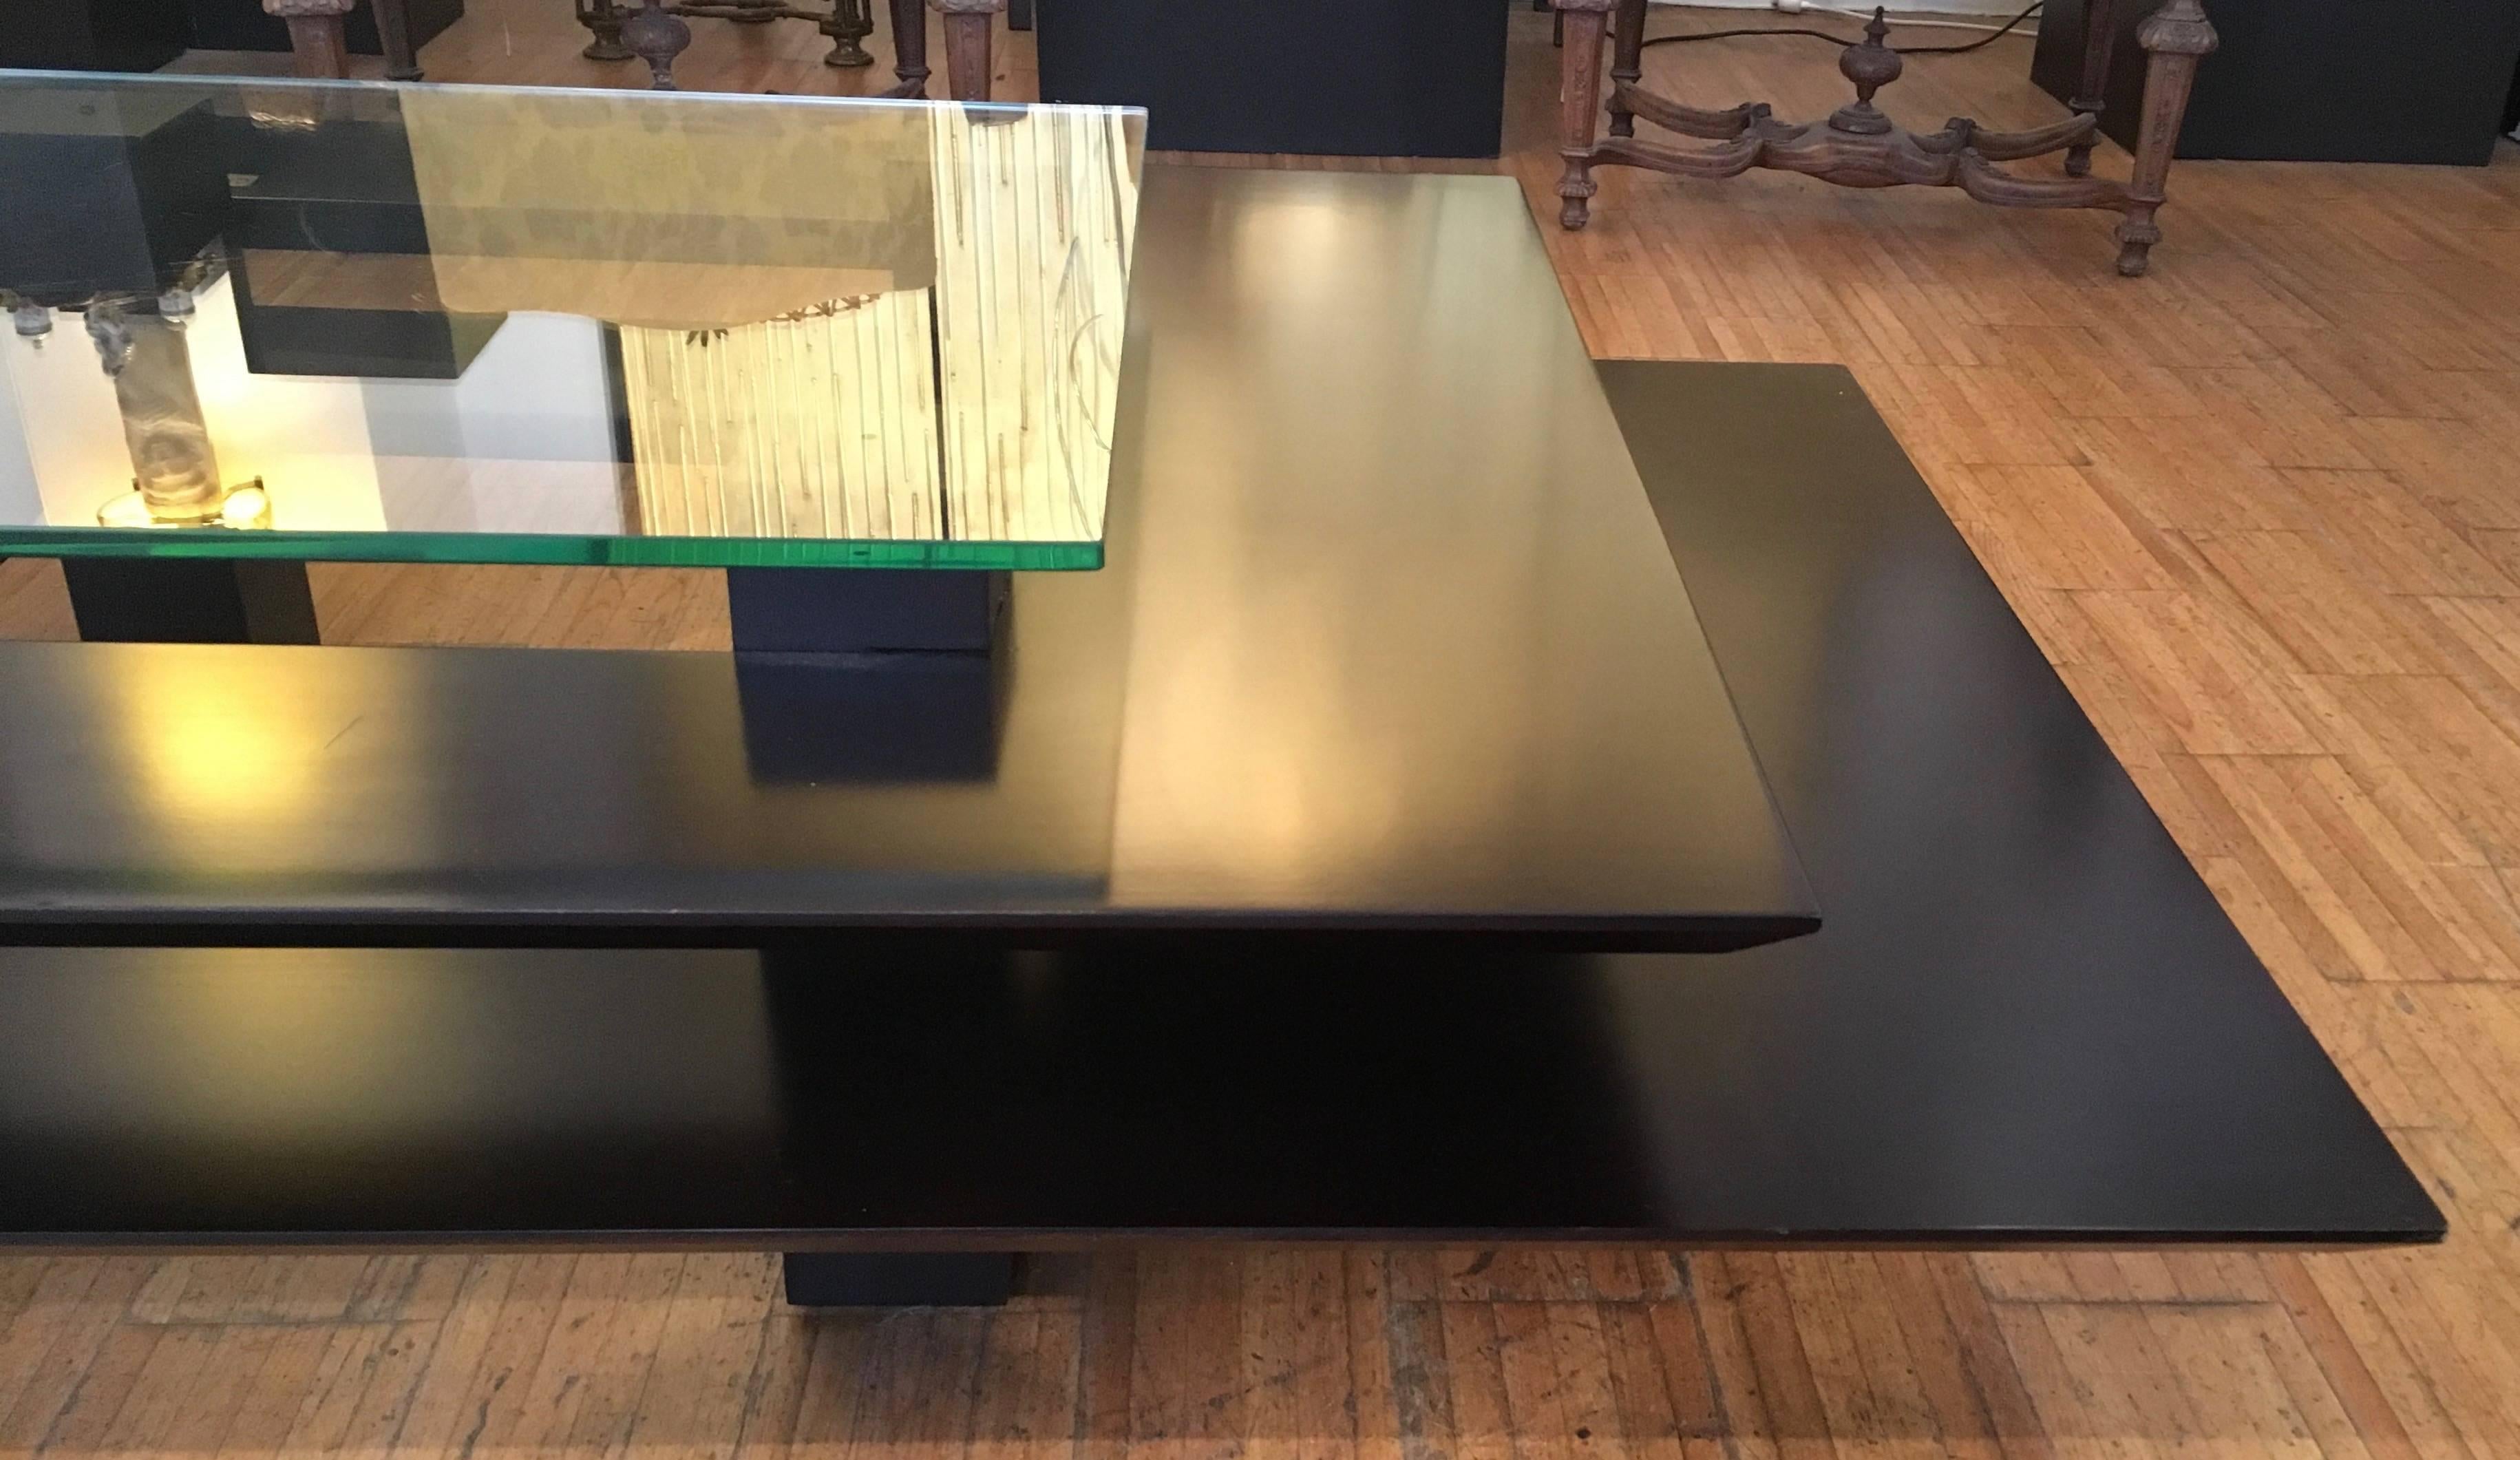 Helène Clemmer Heidsieck 

Coffee table, made of three overlaid surfaces (two wooden and the top one in see-through glass). Elegant and light. 

Signed Clemmer Heidsieck.

Measures: Bottom layer (in wood) : 145 x 100 cm
Middle layer (wood): 120 x